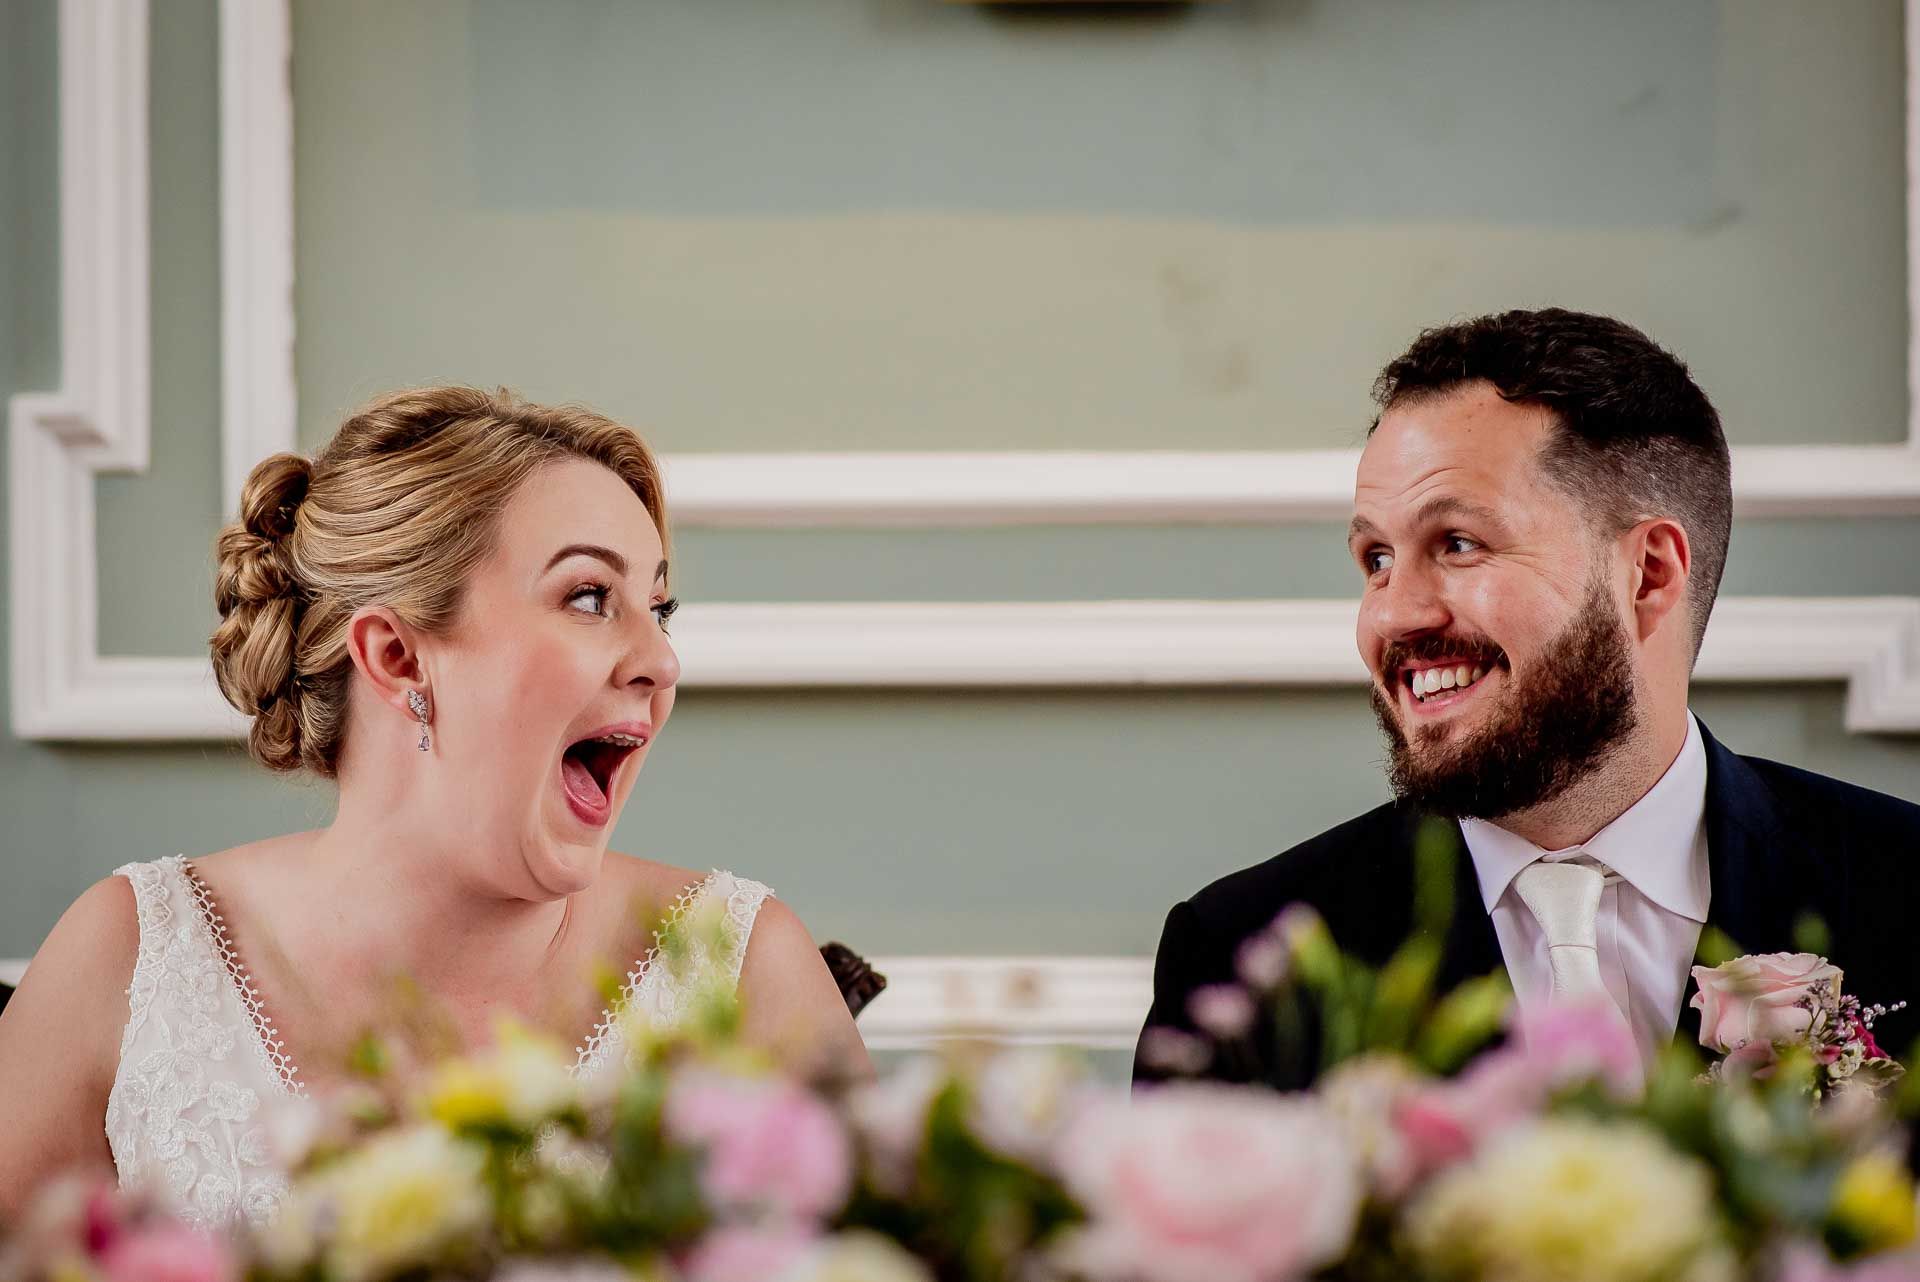 Leah and Nic looking at each exclaiming with their mouths open as if to say 'oh my we are married'. Photo thanks to Damien Vickers Photography.